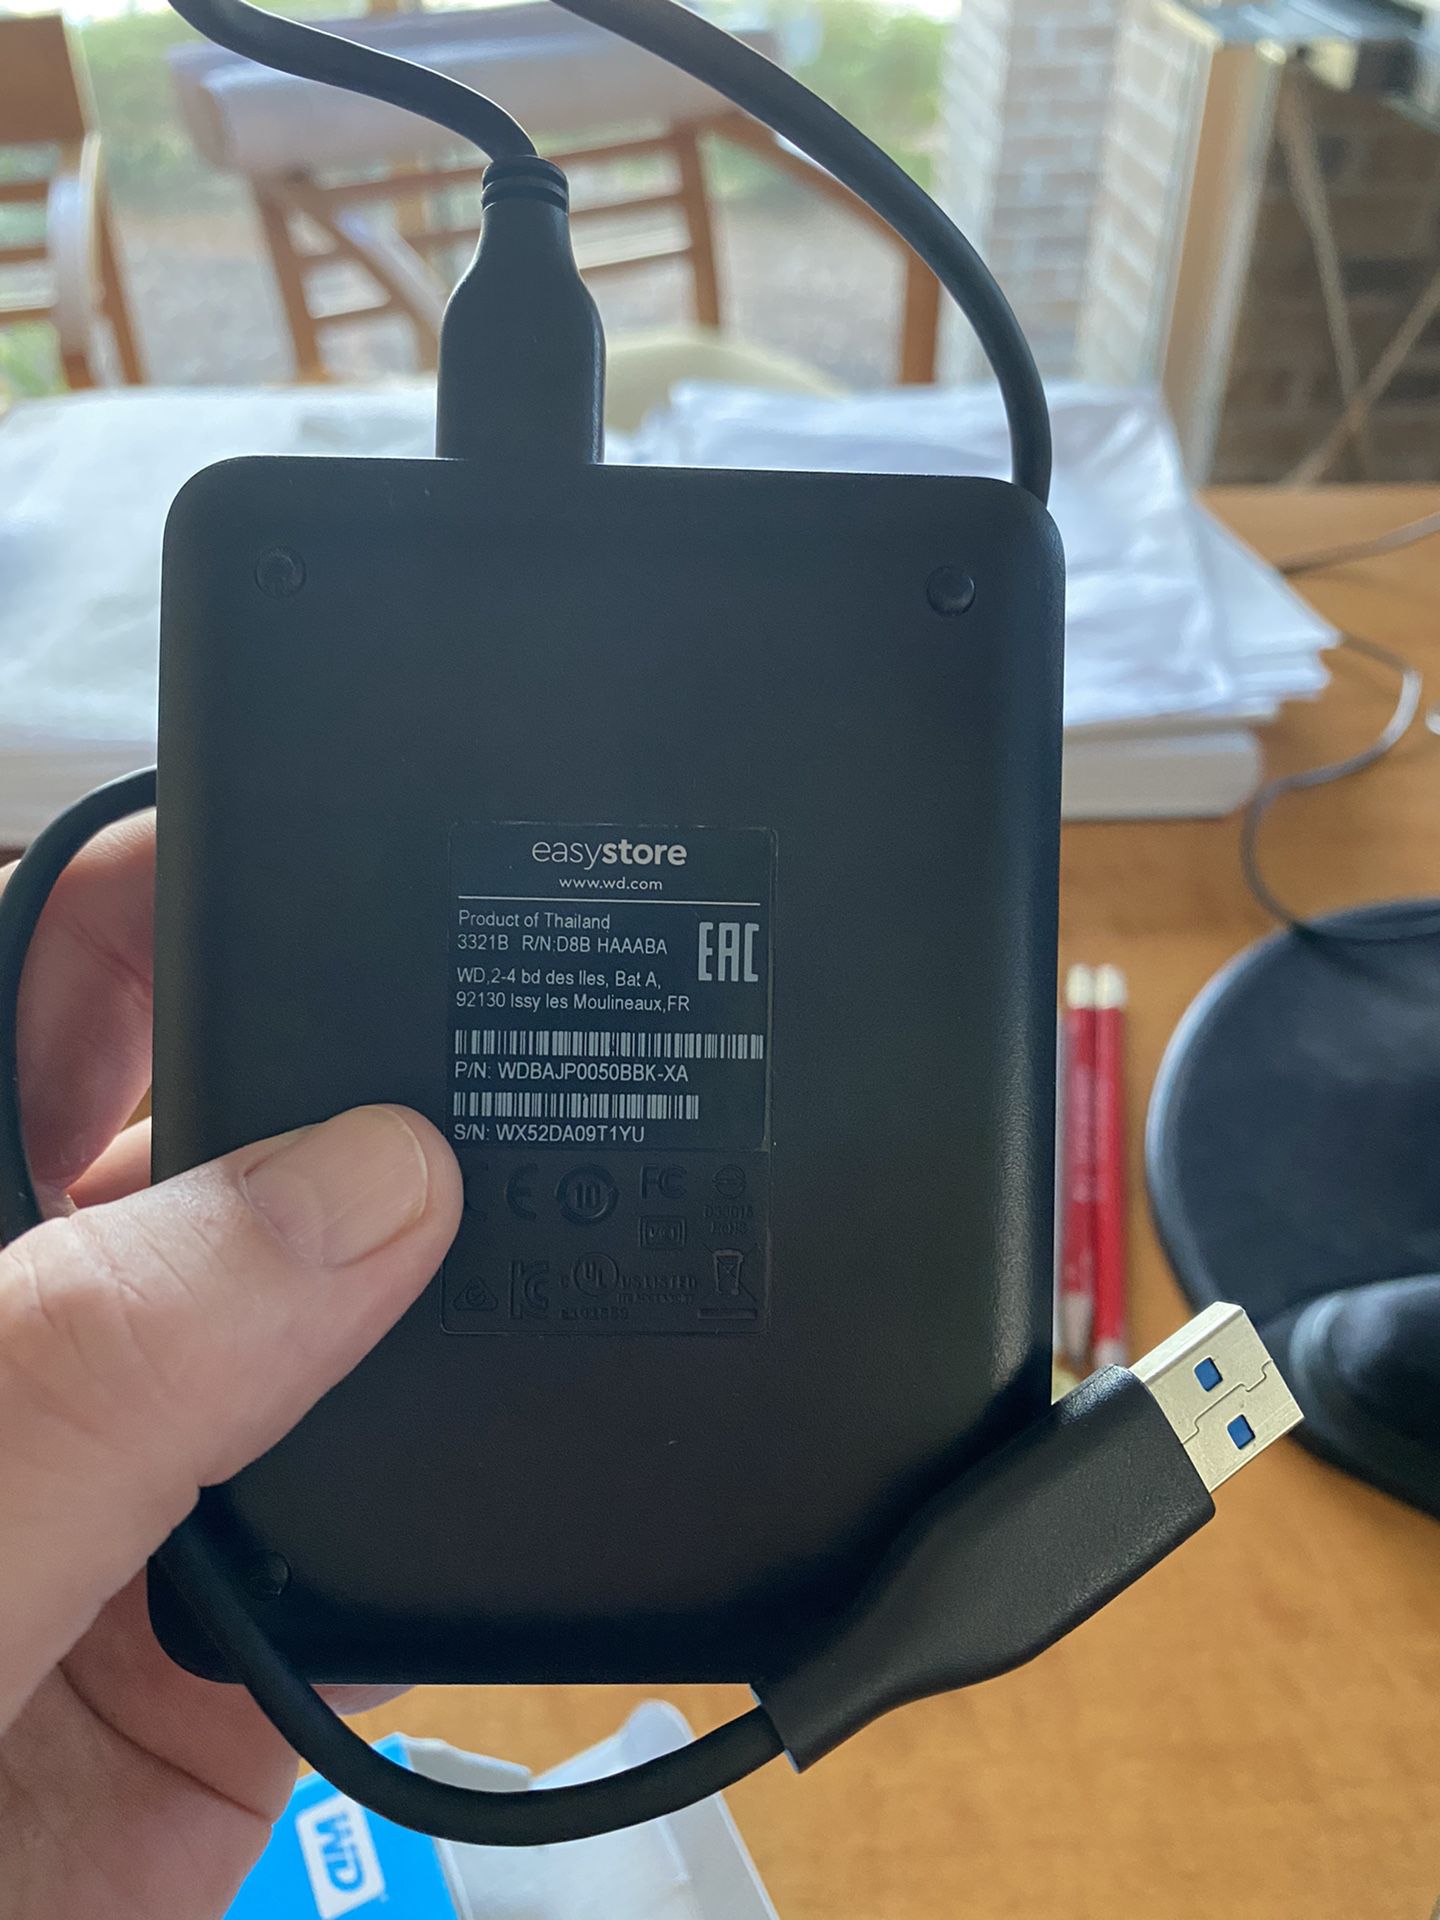 easystore 5tb back up drive